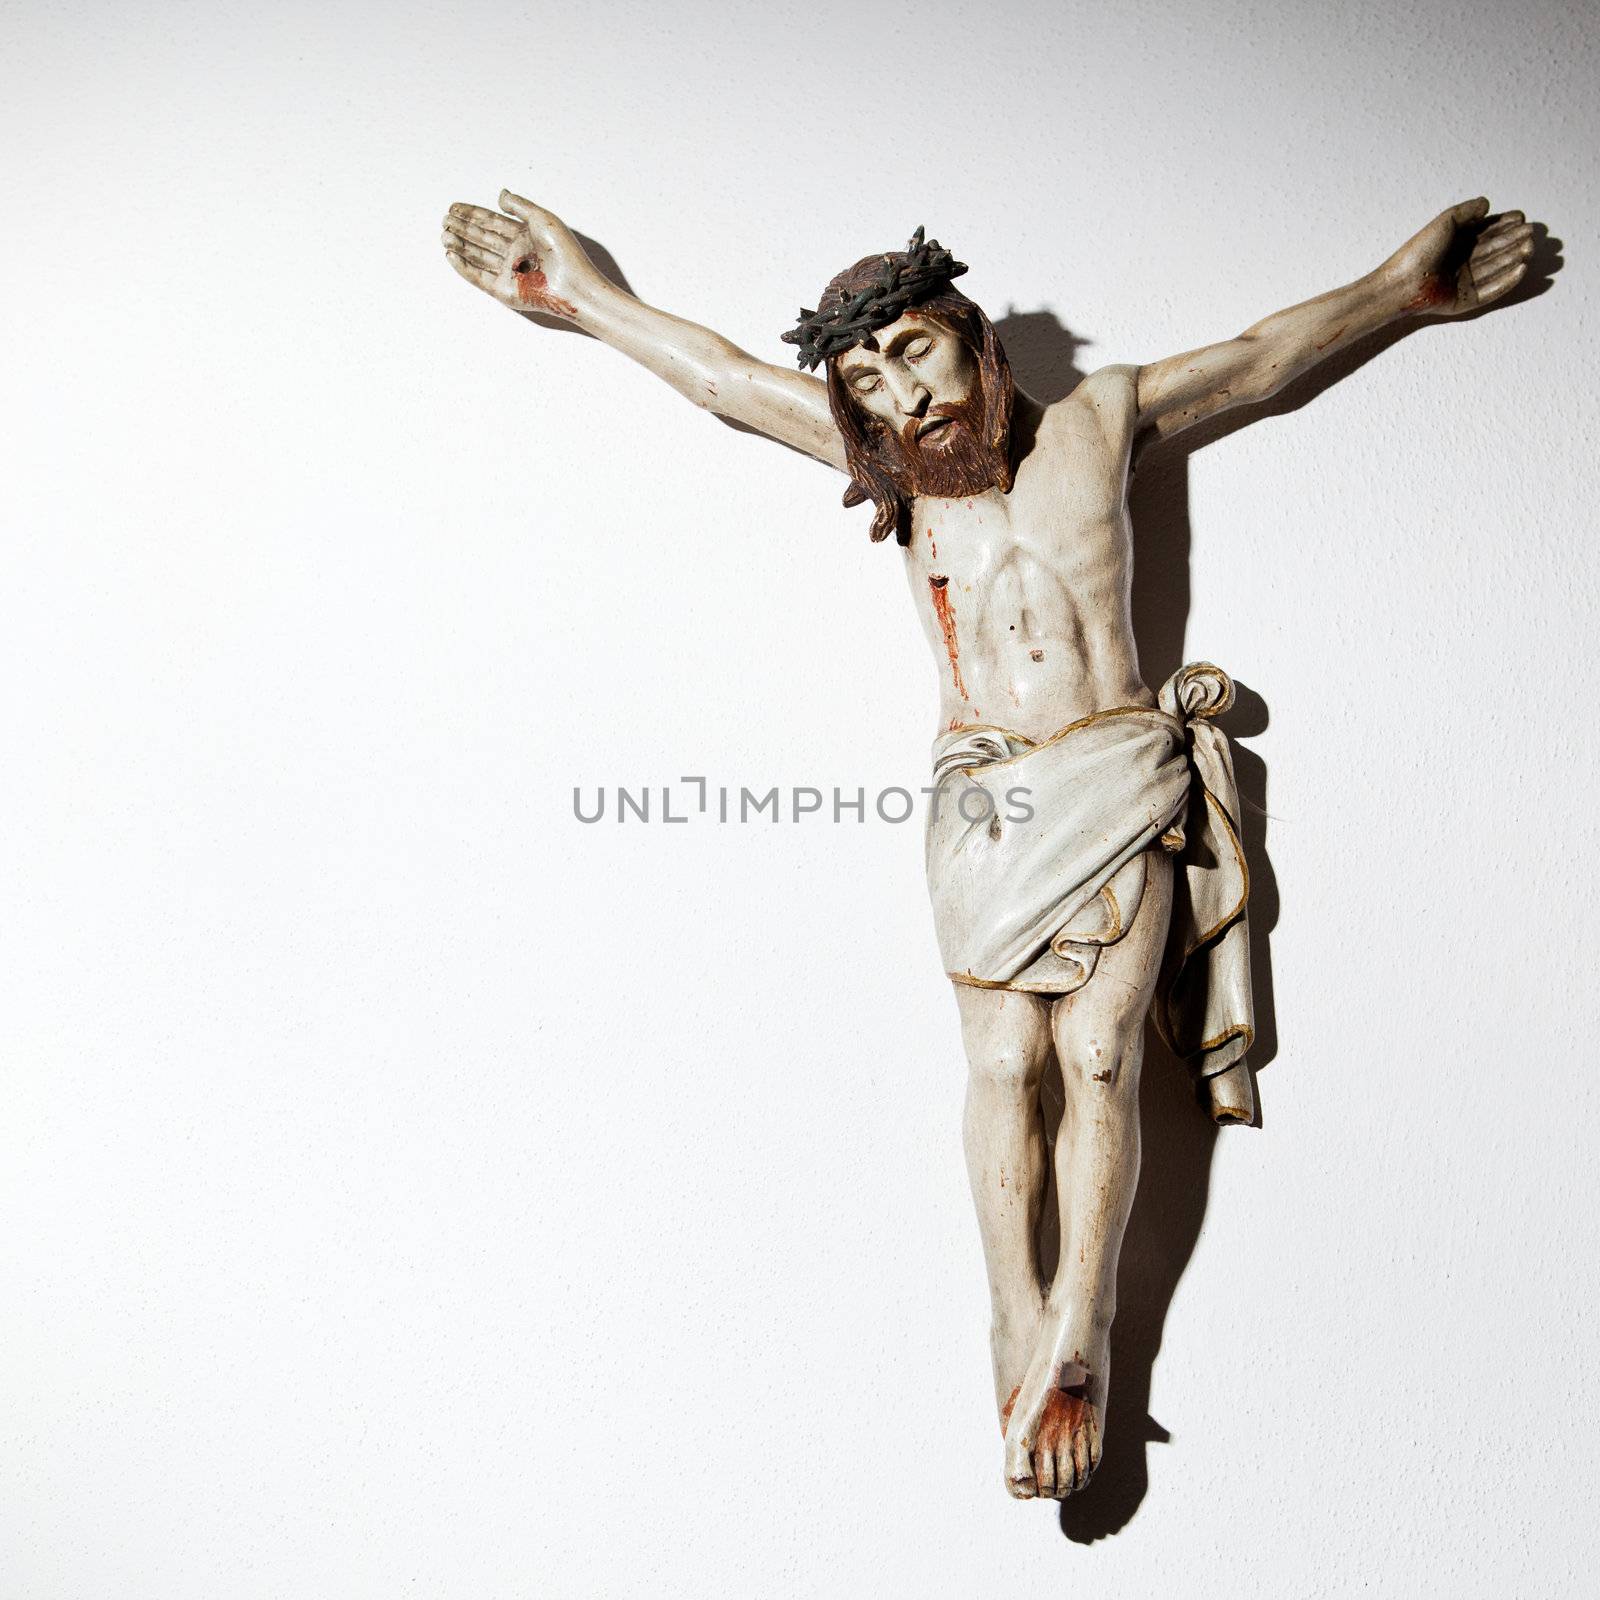 Very old carved and painted wooden crucifix on a wall in a historical country cottage